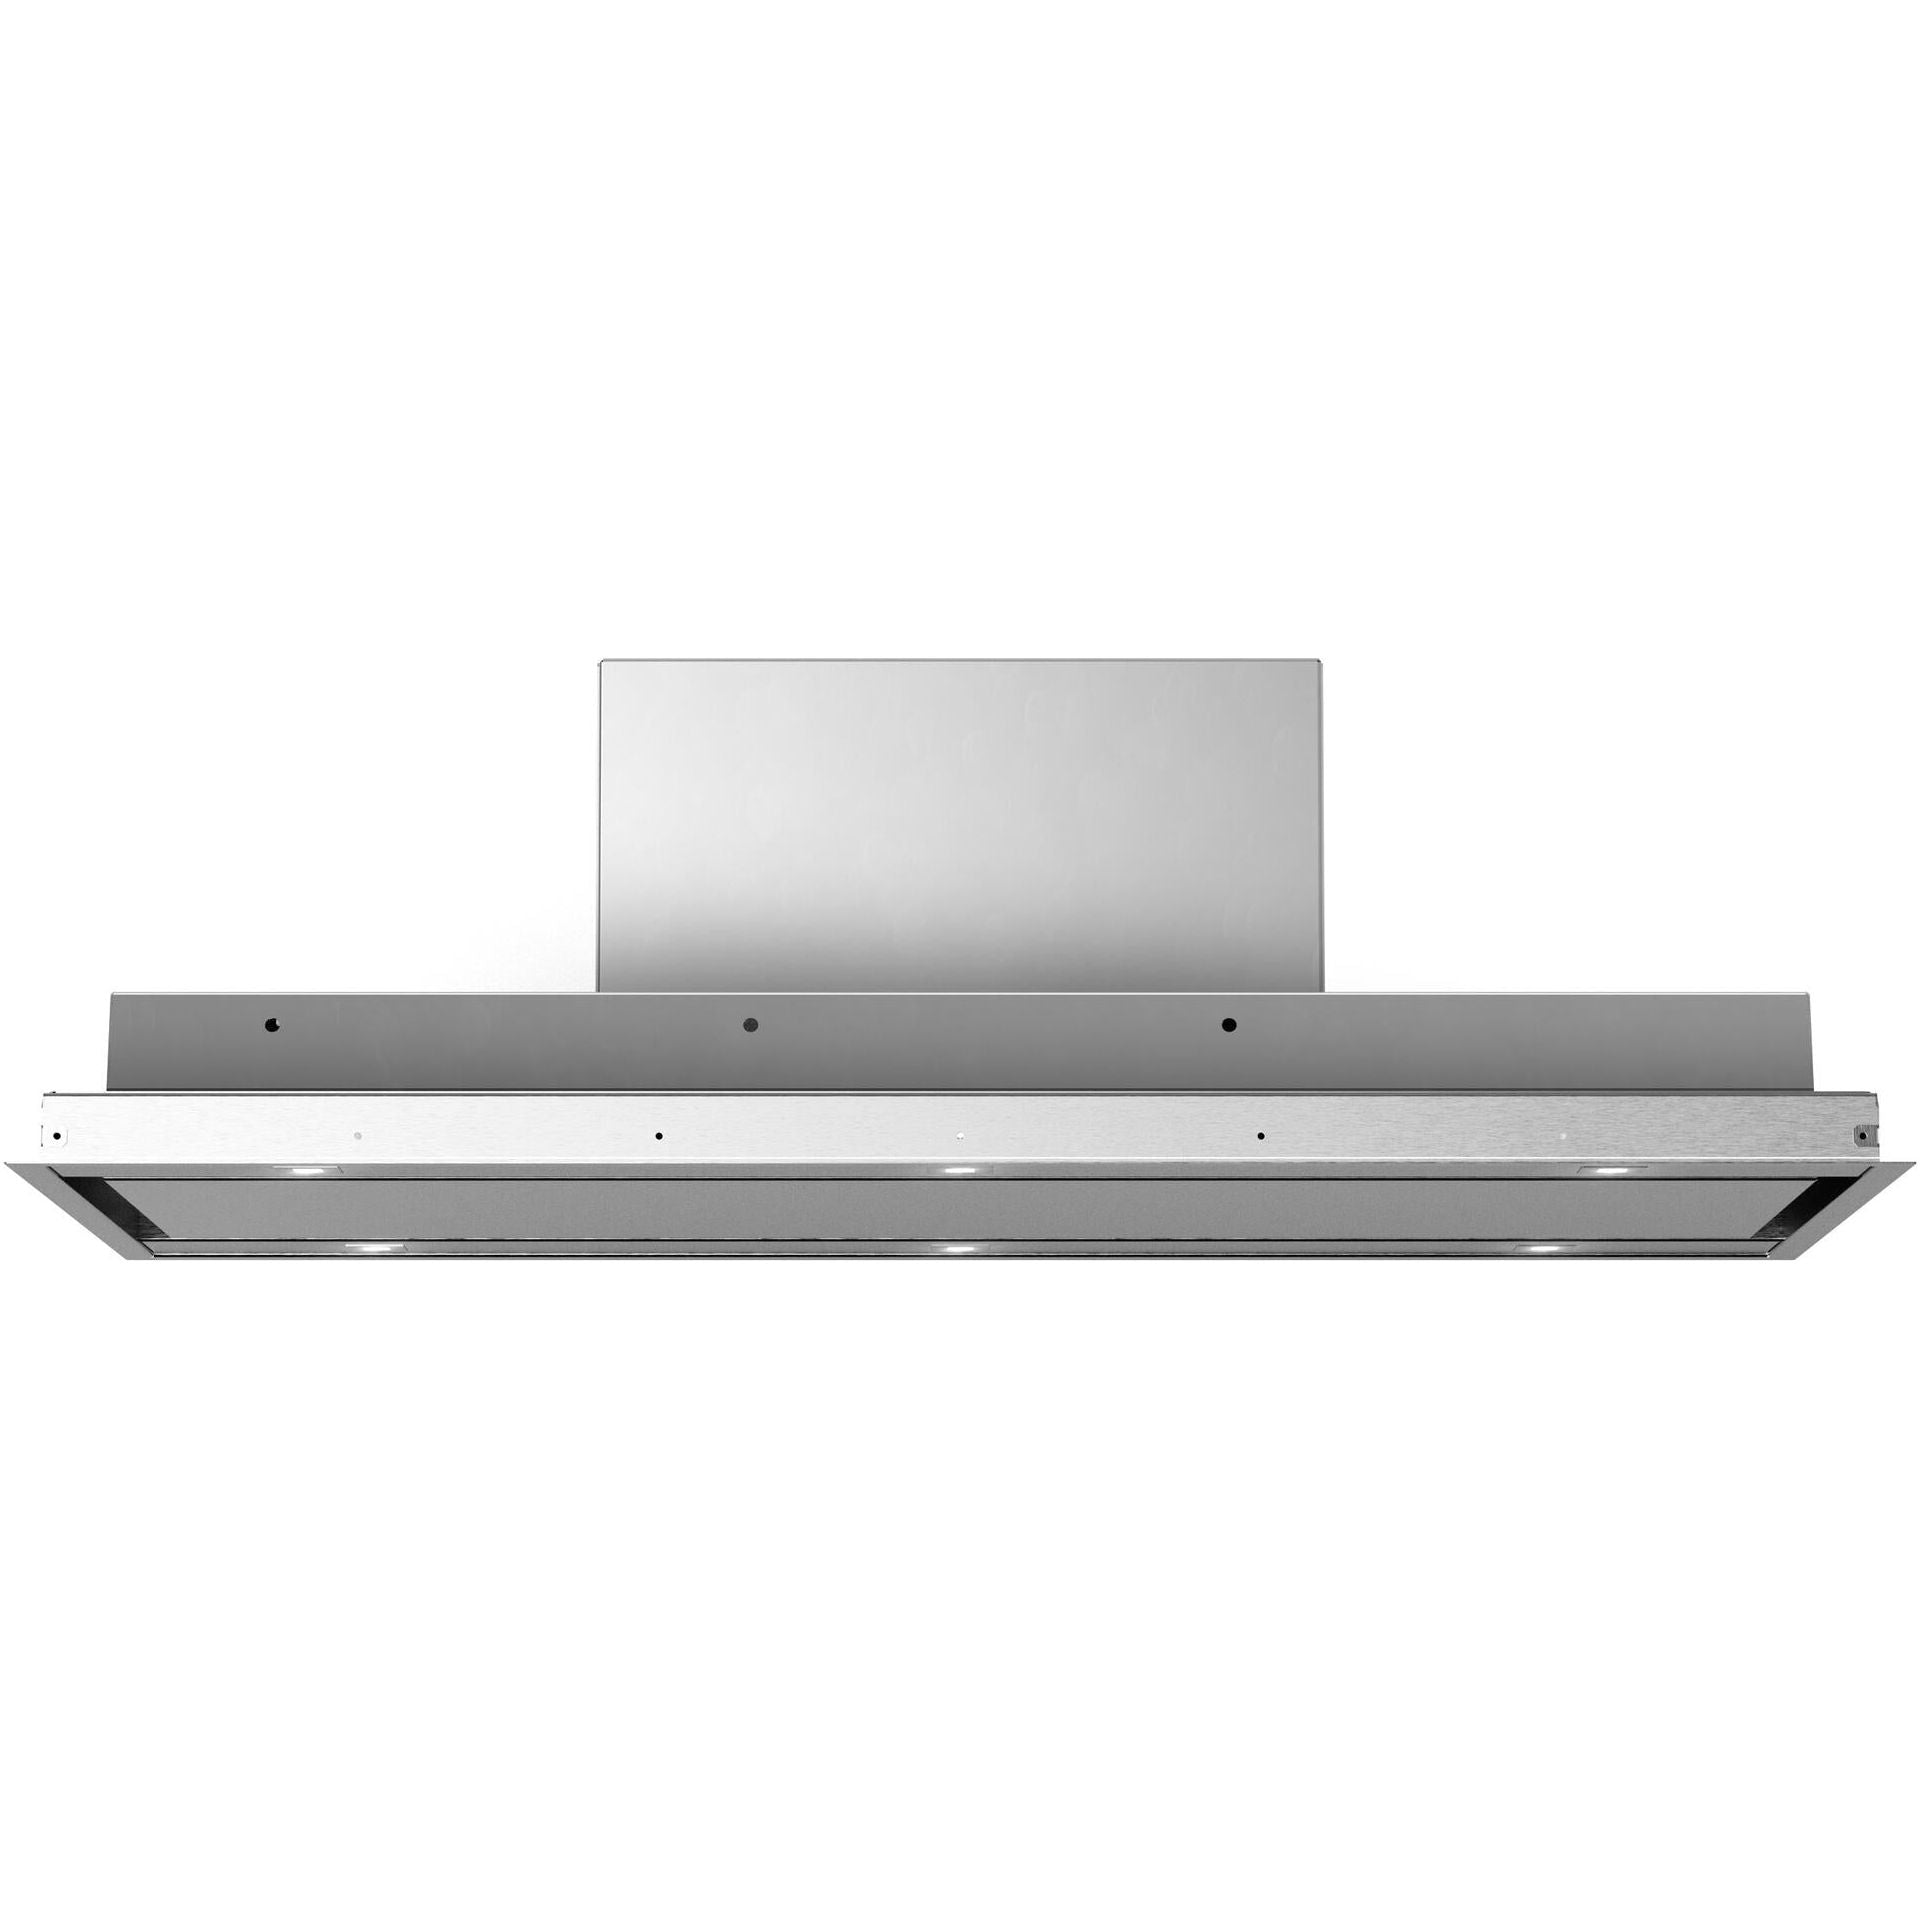 Forte Vertice Series 48" Ceiling Mount Hood with 600 CFM & LED Lighting in Stainless Steel (VERTICE48) - New Star Living